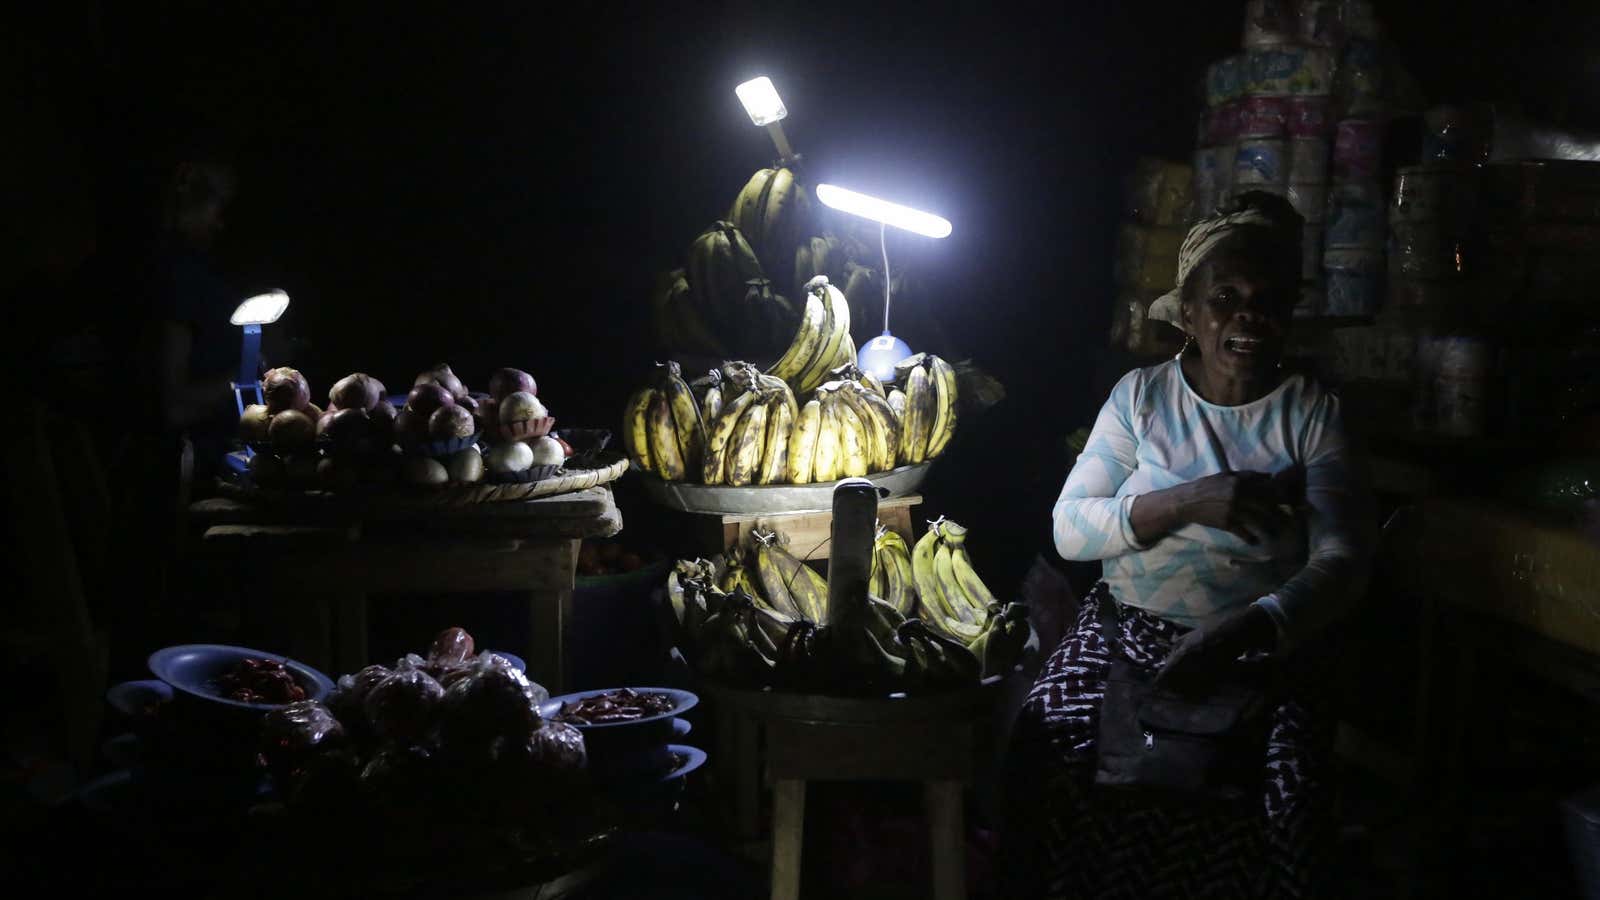 Lagos vegetable vendors ply their wares by solar lanterns in Nigeria